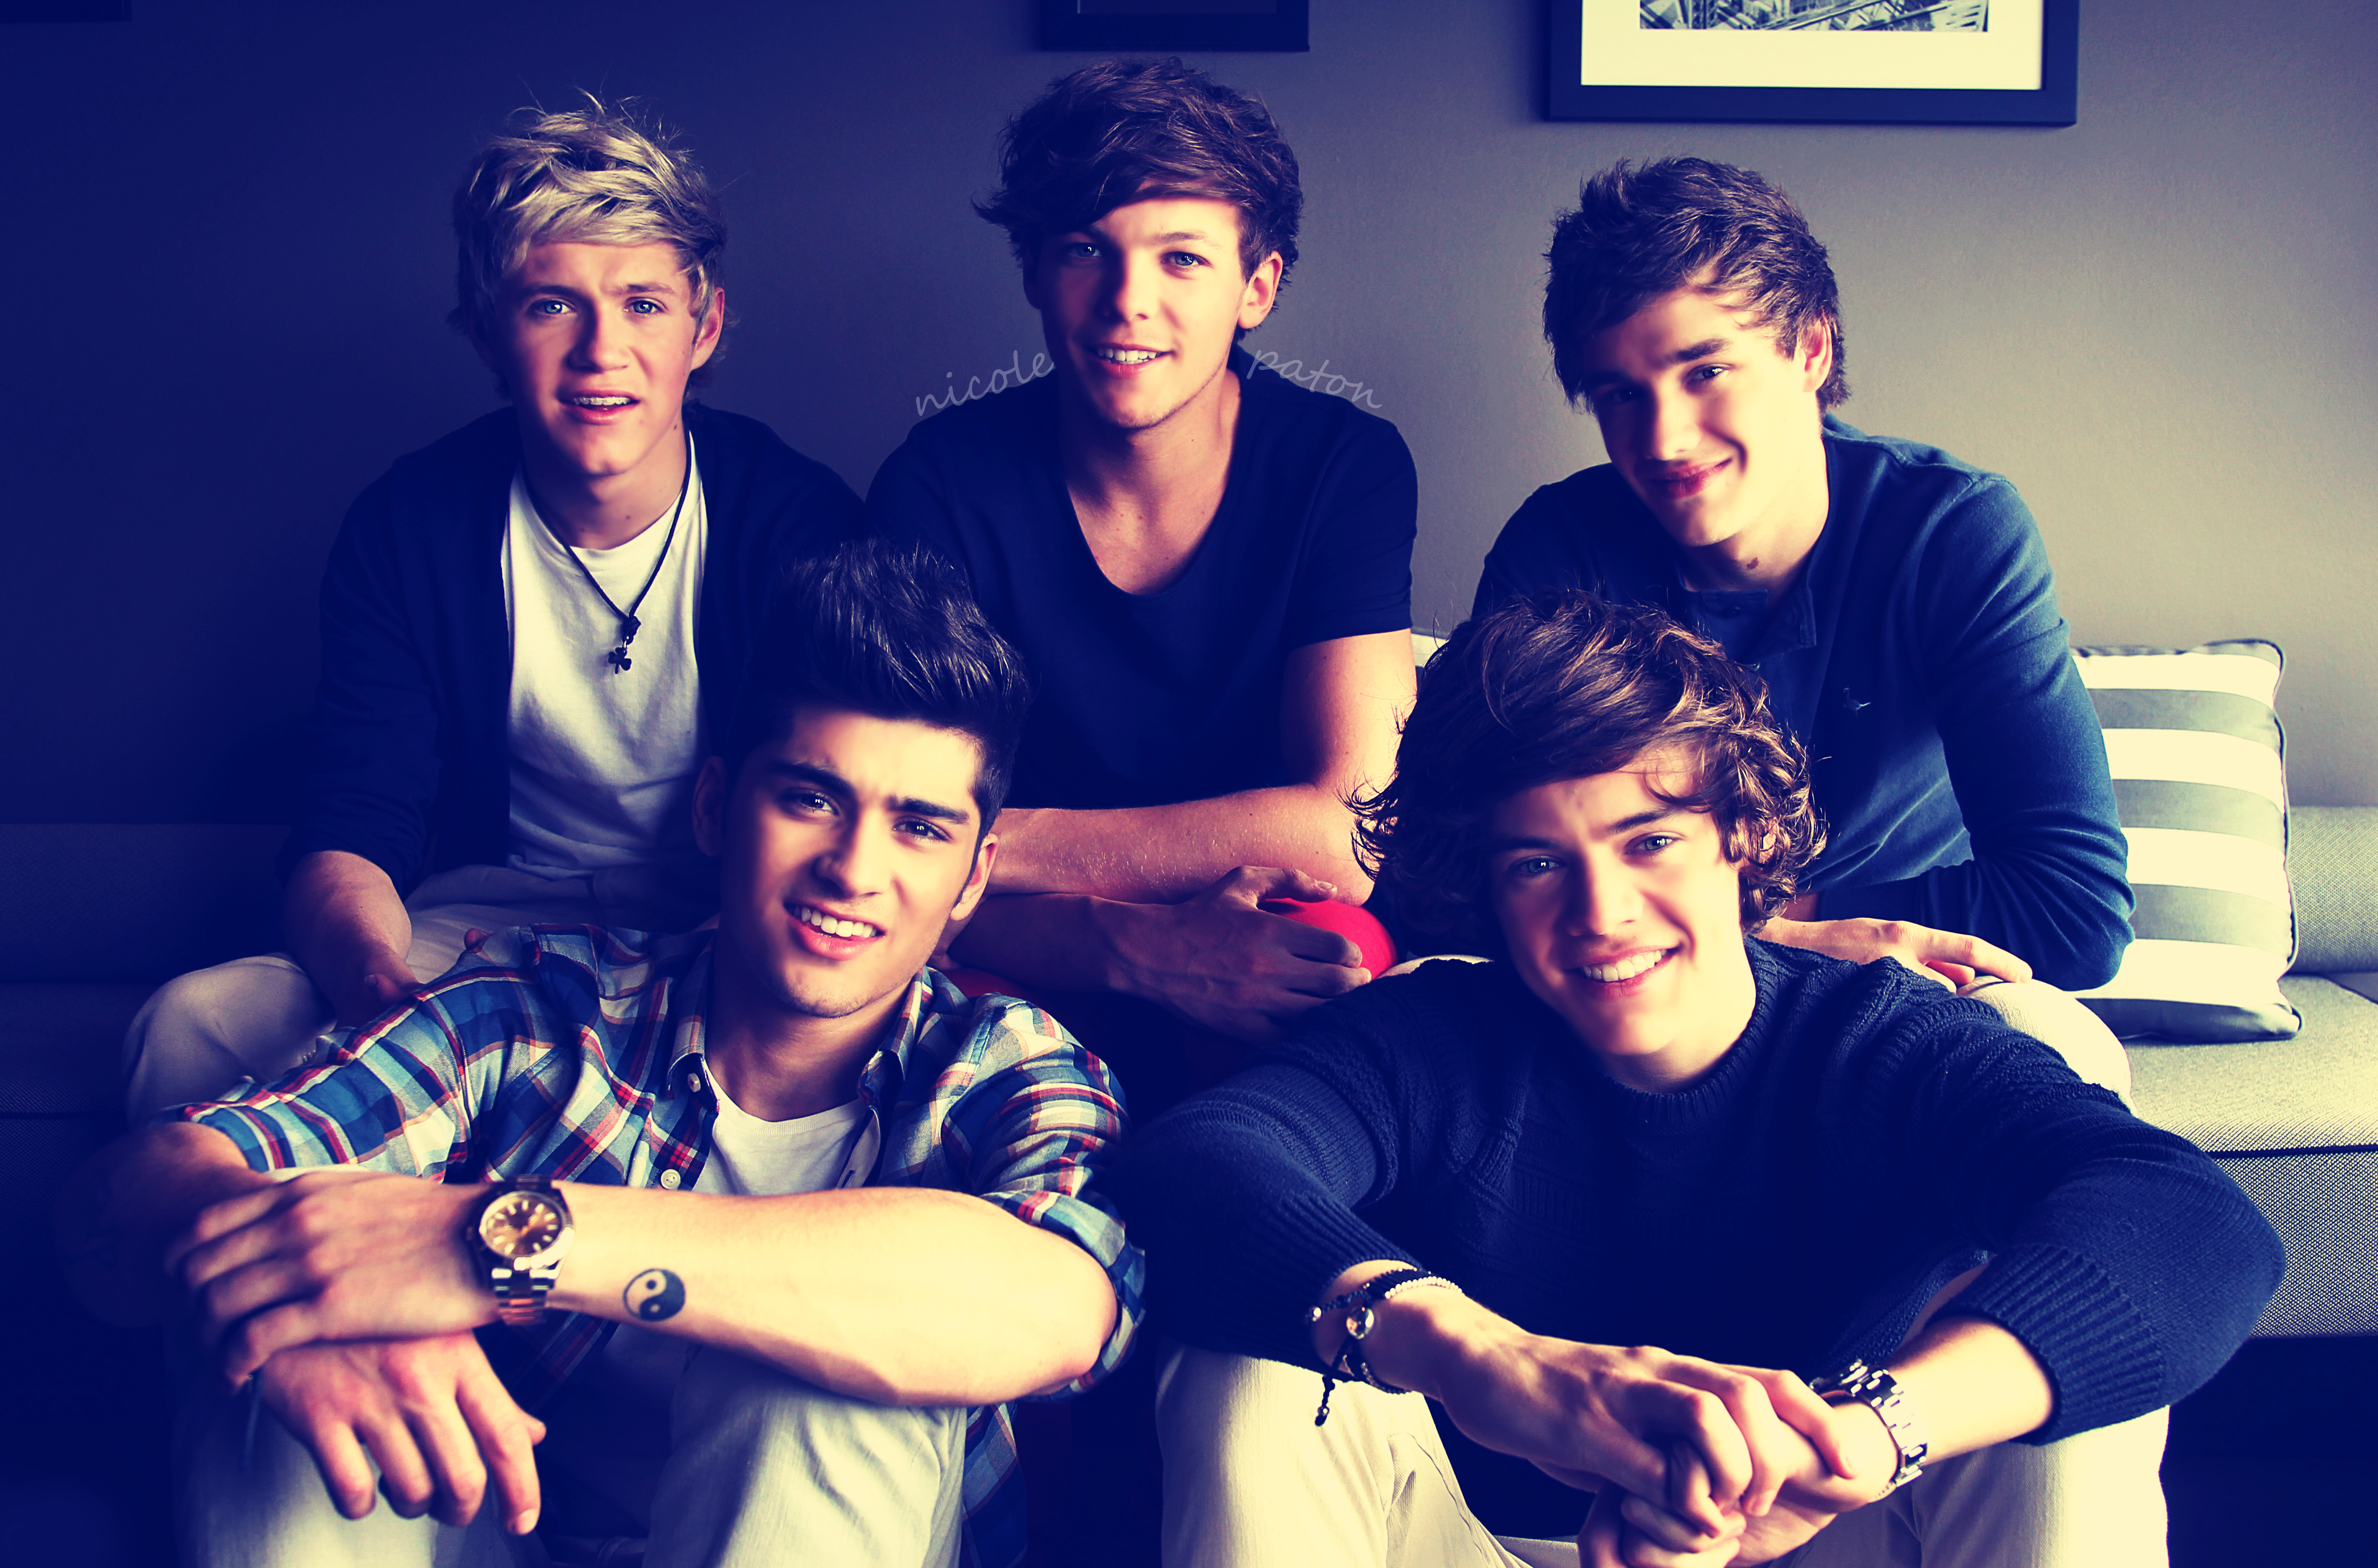 Teenage Group One Direction Wallpaper And Image